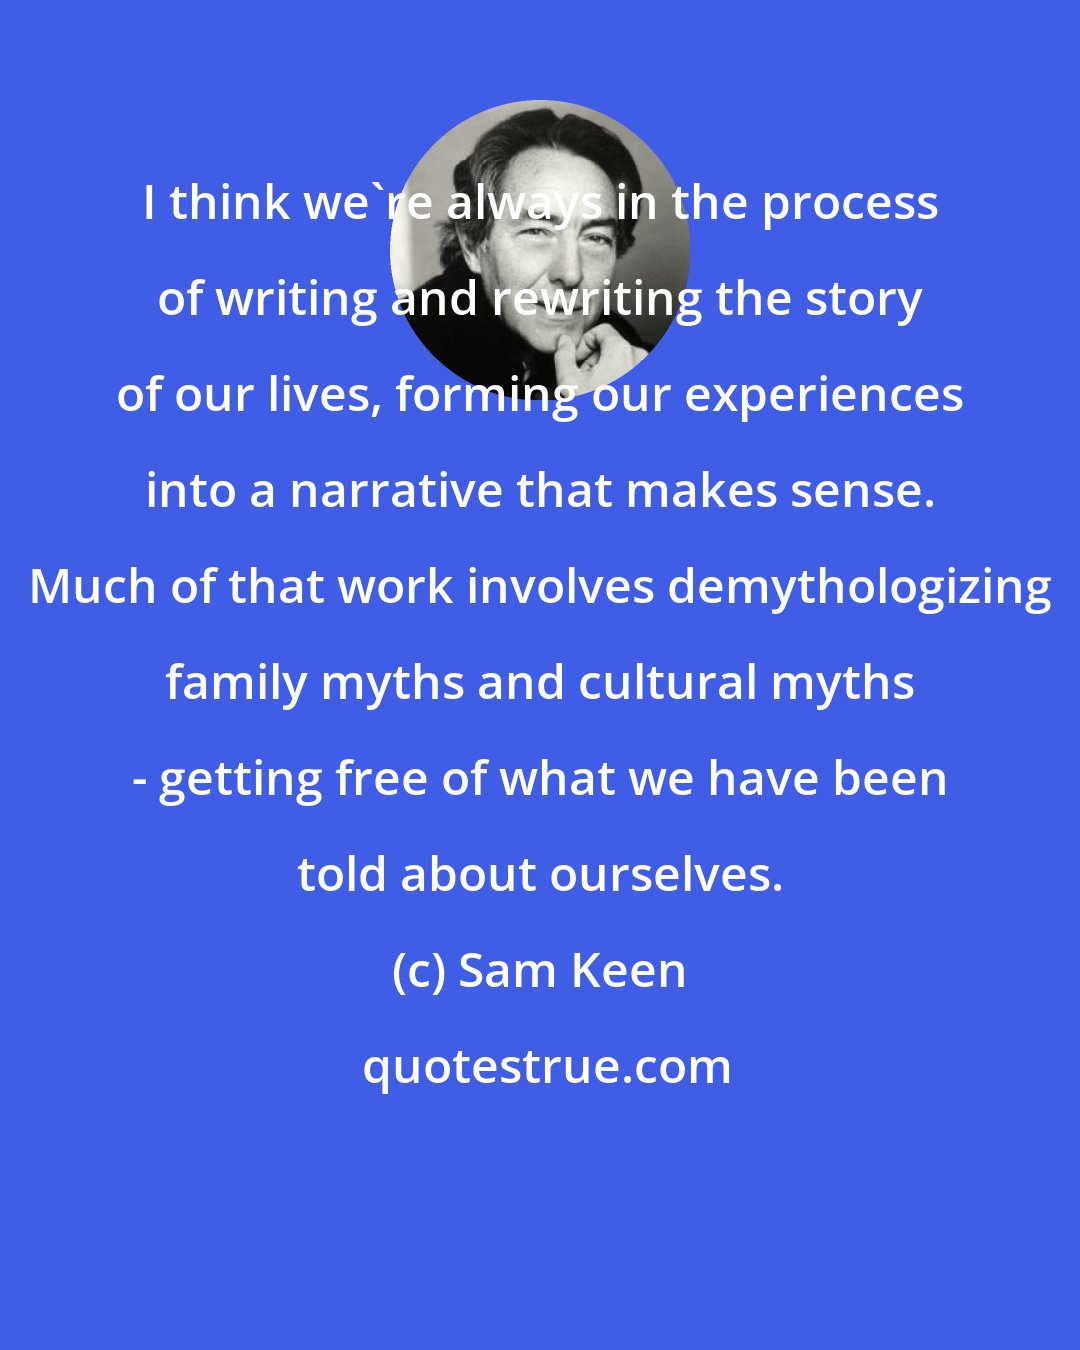 Sam Keen: I think we're always in the process of writing and rewriting the story of our lives, forming our experiences into a narrative that makes sense. Much of that work involves demythologizing family myths and cultural myths - getting free of what we have been told about ourselves.